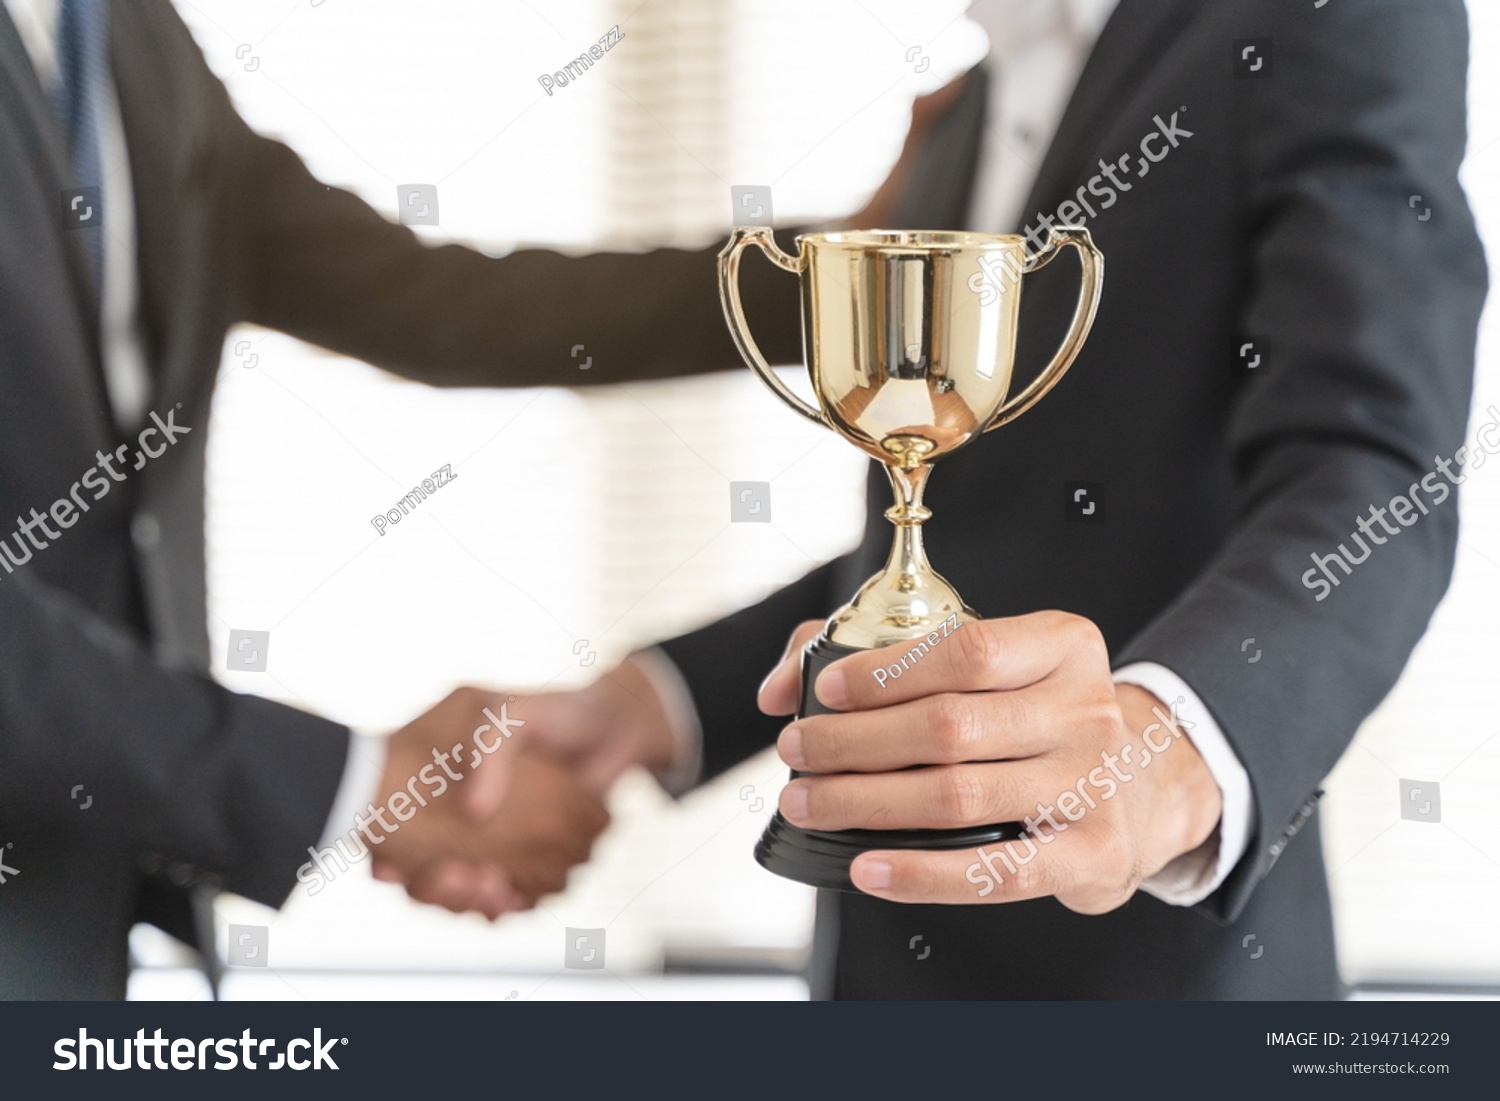 The hands of an employee receiving a golden cup reward from the company manager represent his performance in his career job reward. #2194714229